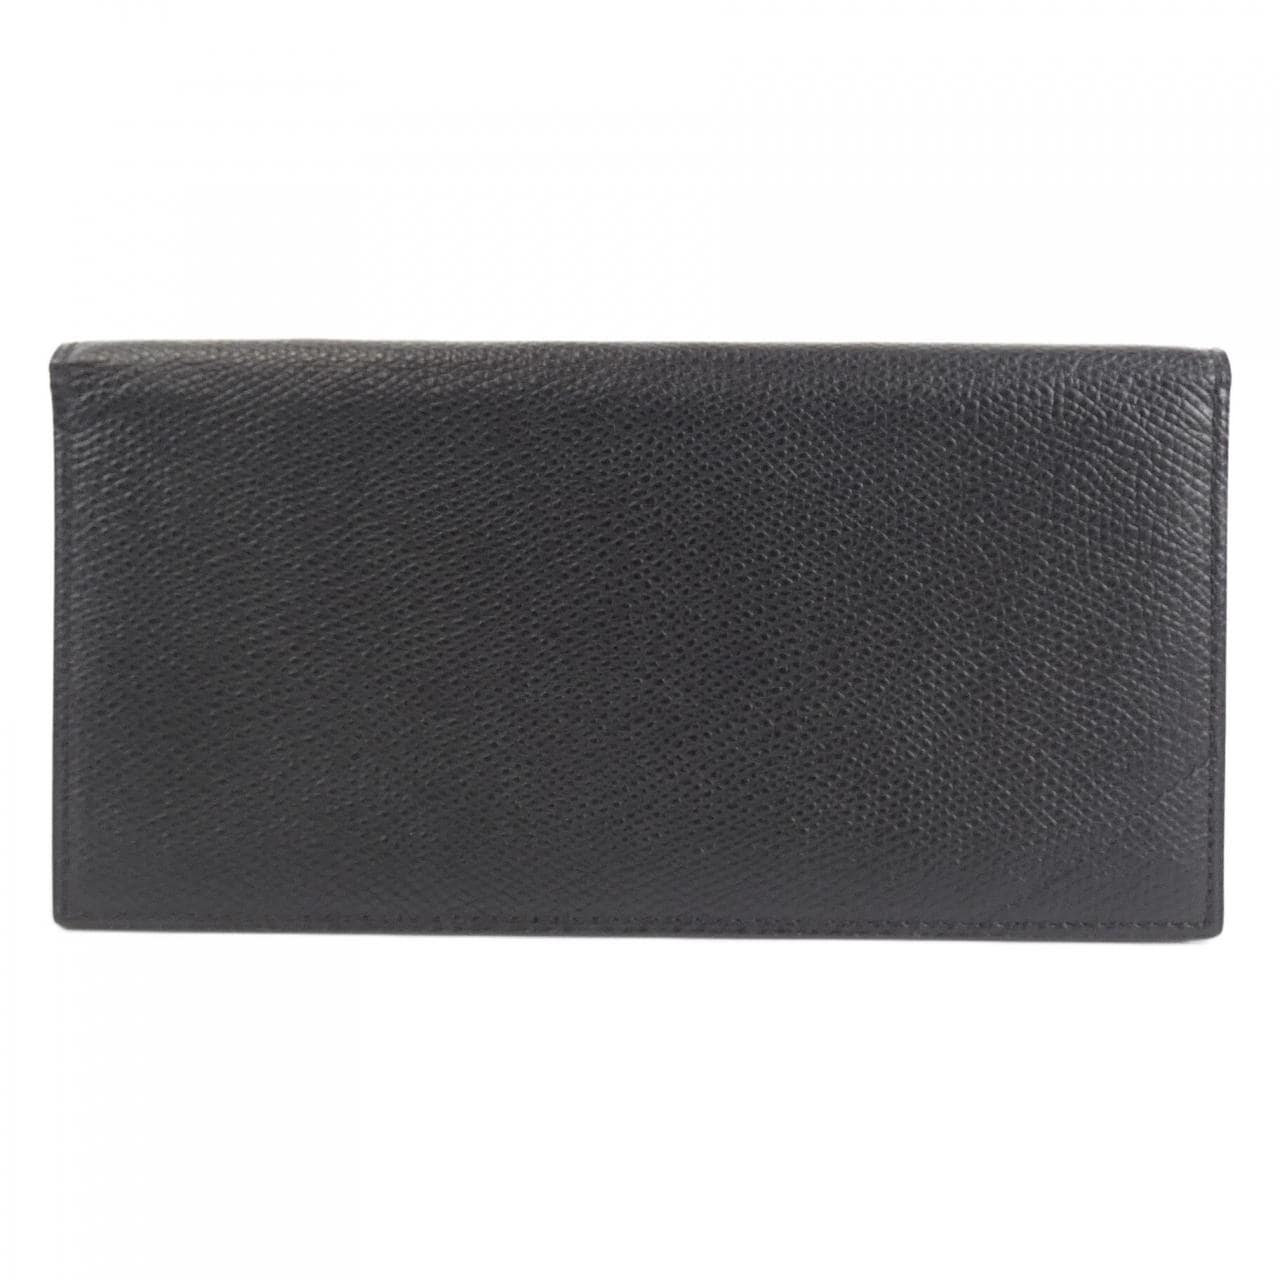 CAMILLE FOURNET WALLET